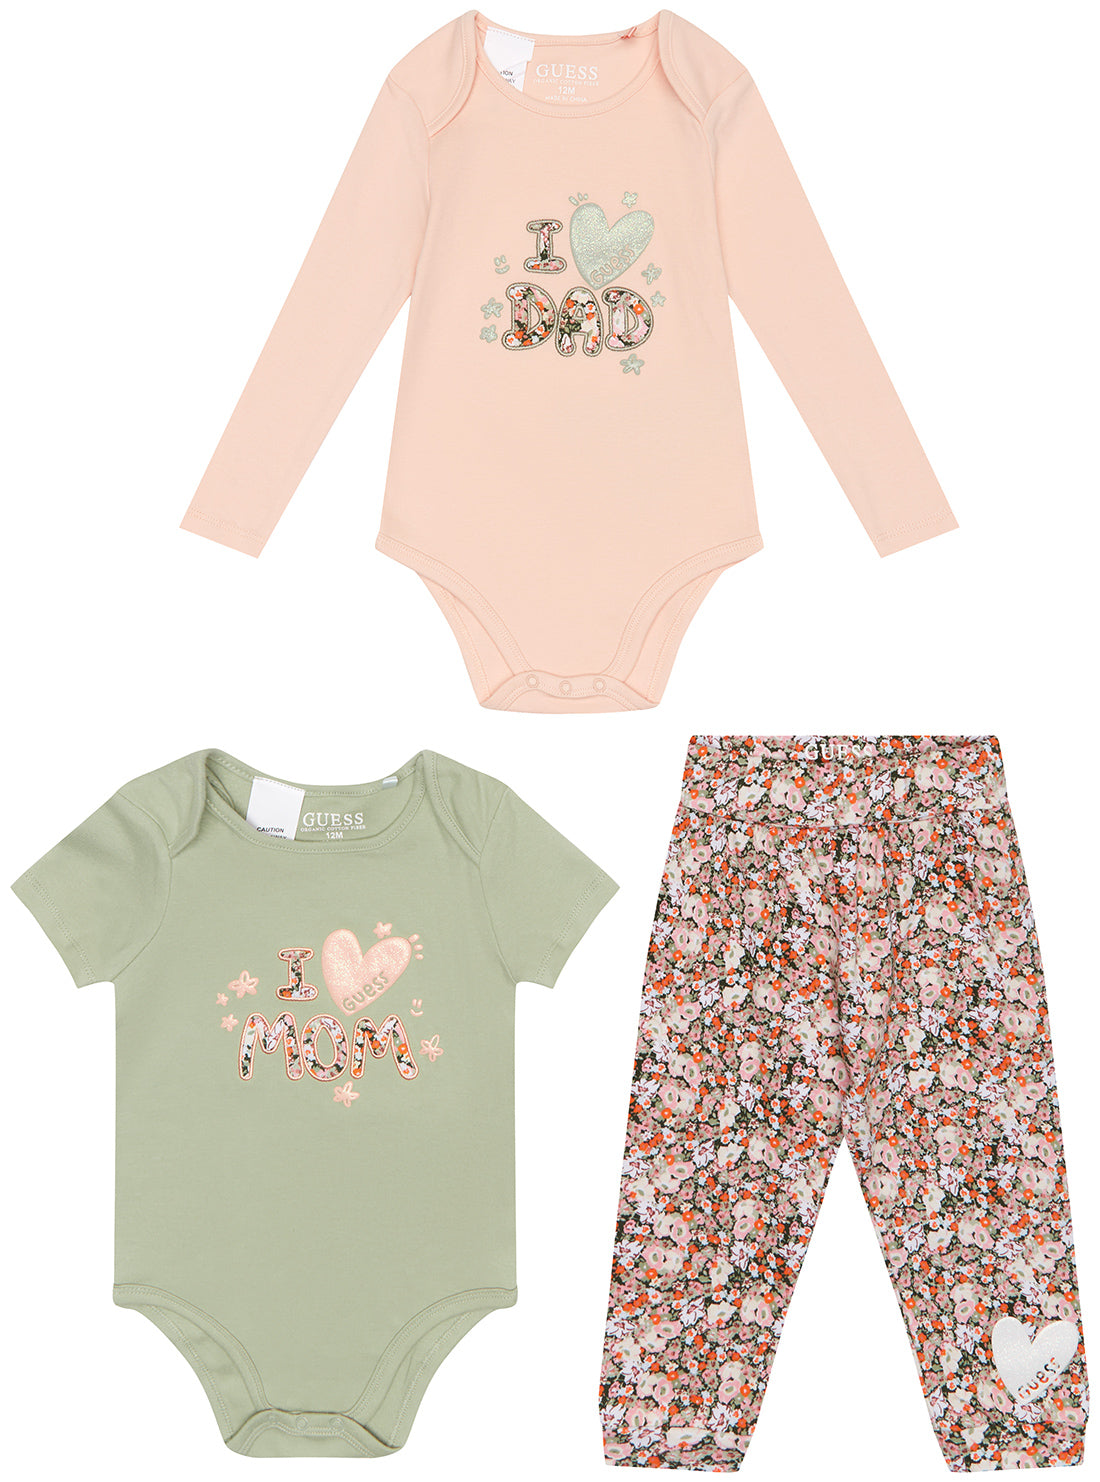 Pink and Green "I Love" Onesie and Print Pant Set (0-9M) | GUESS Kids | front view